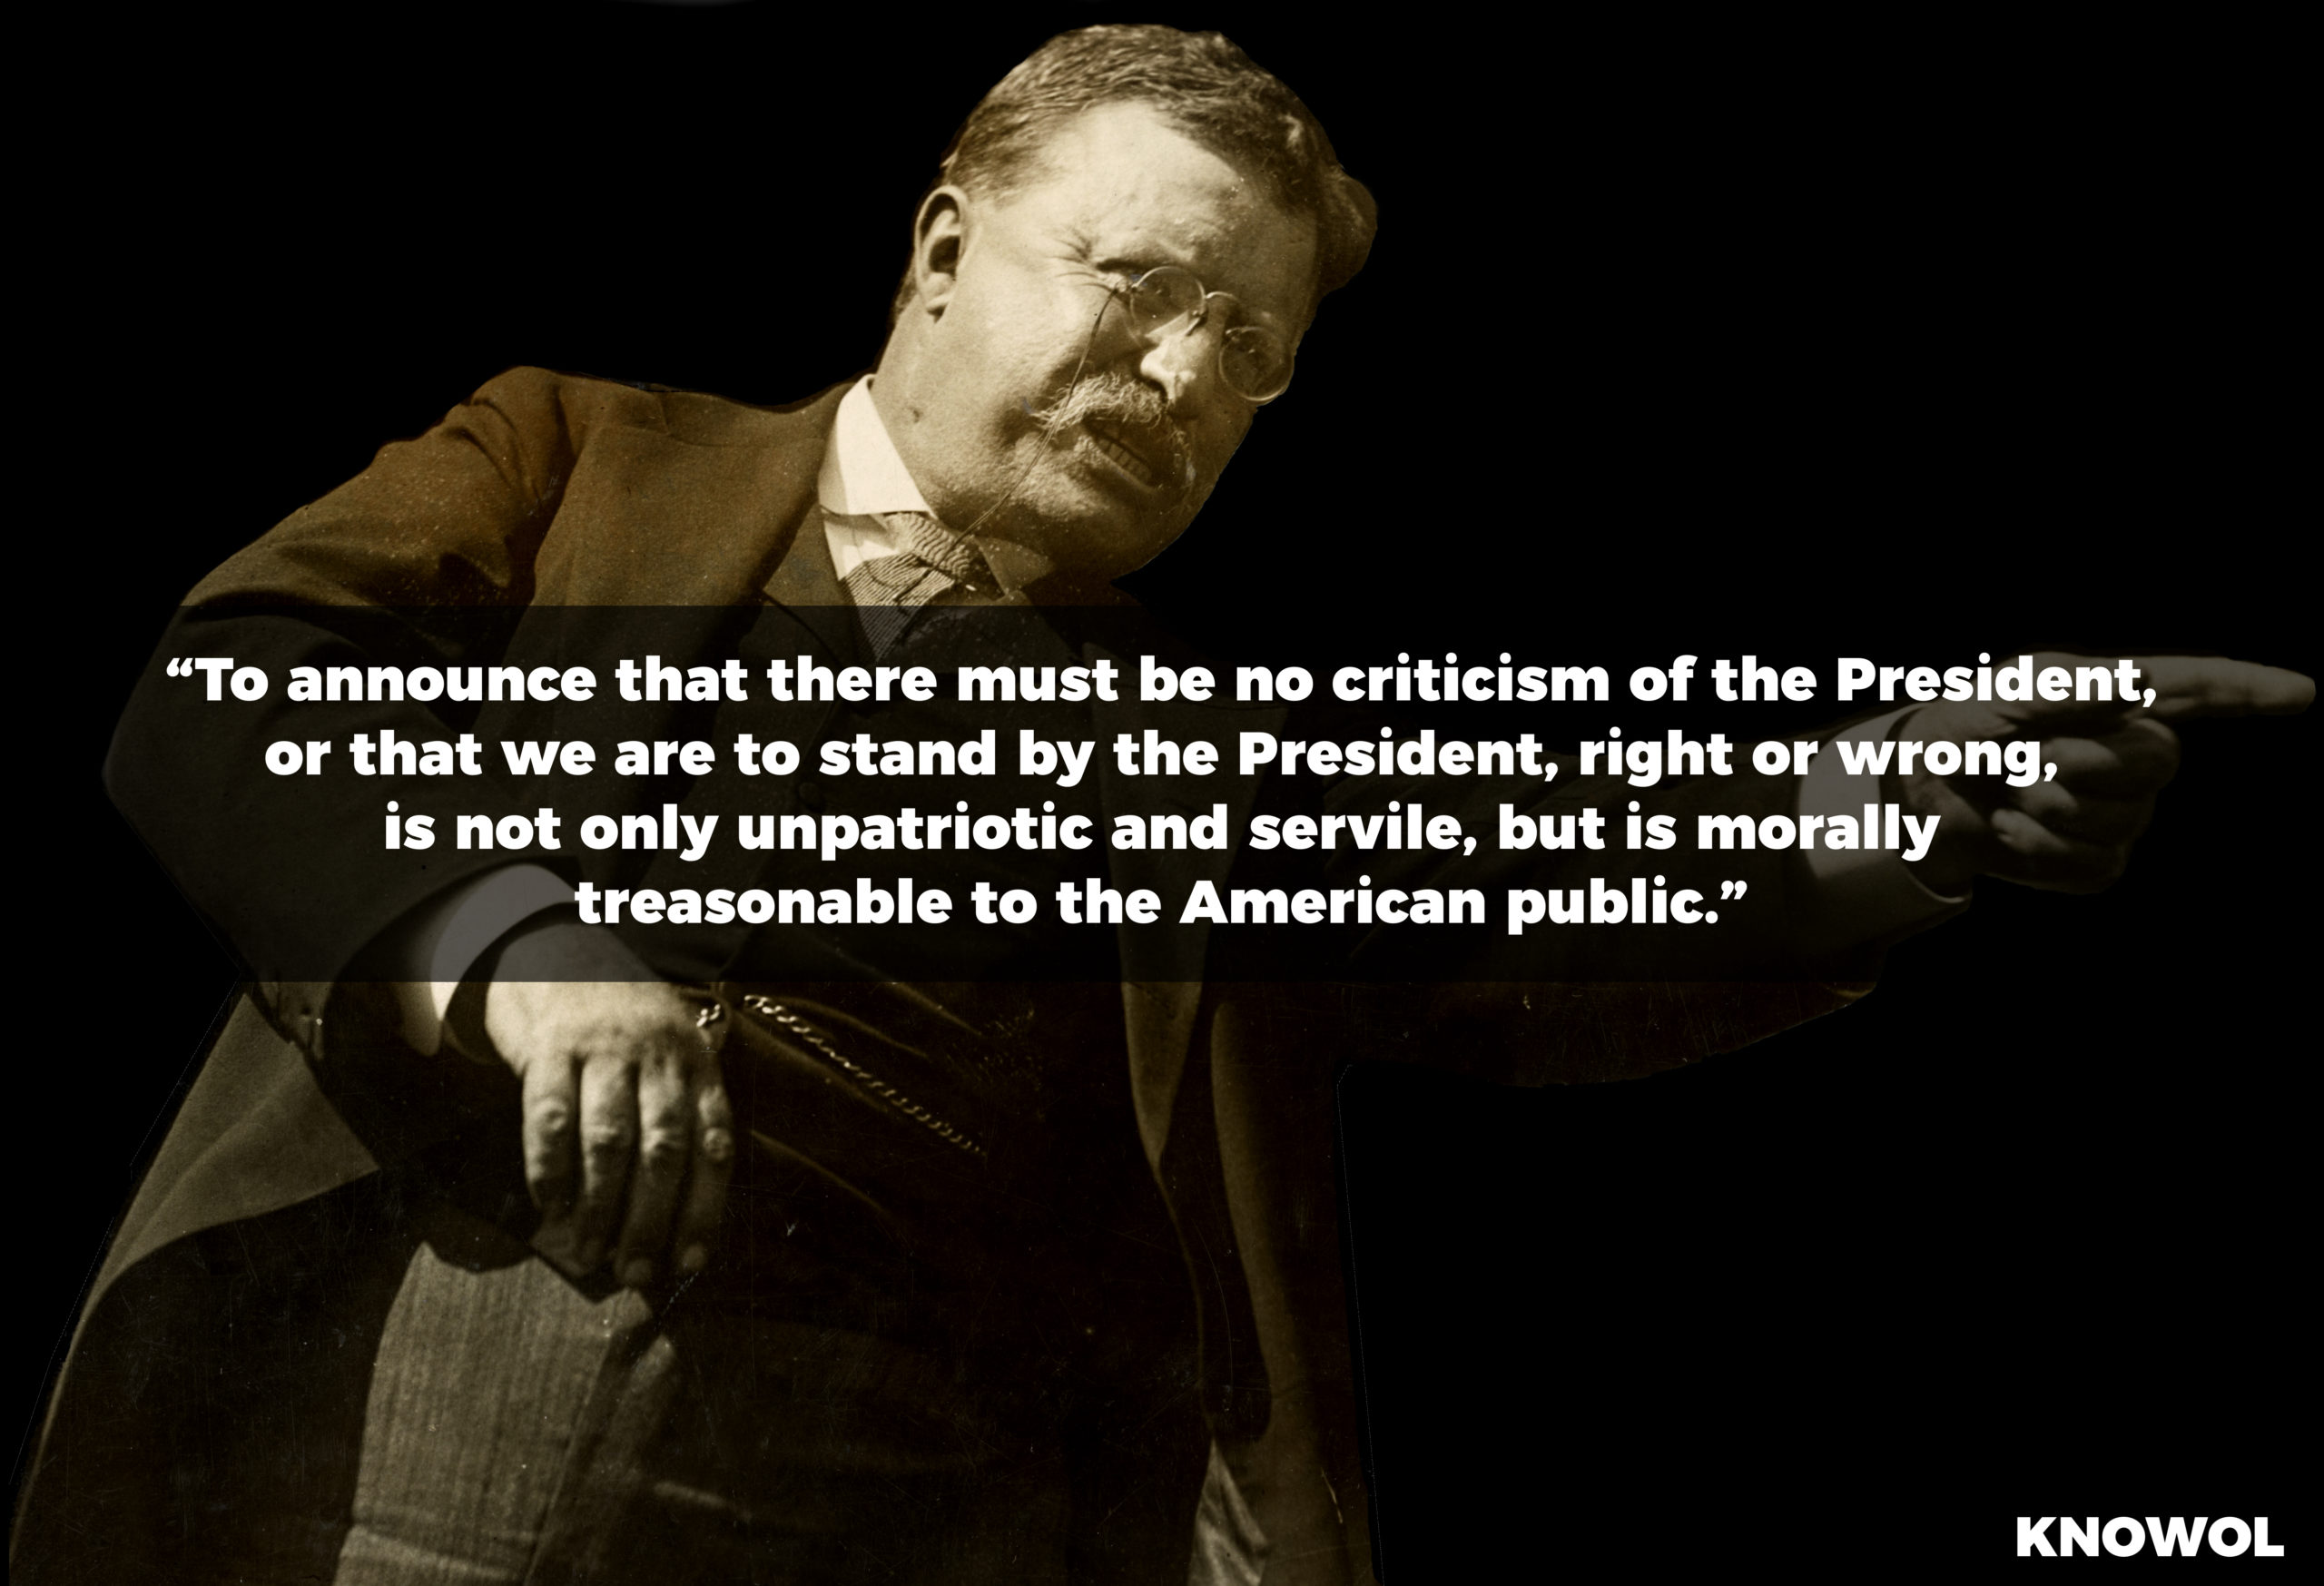 Theodore Roosevelt Discusses Criticism of the President - KNOWOL